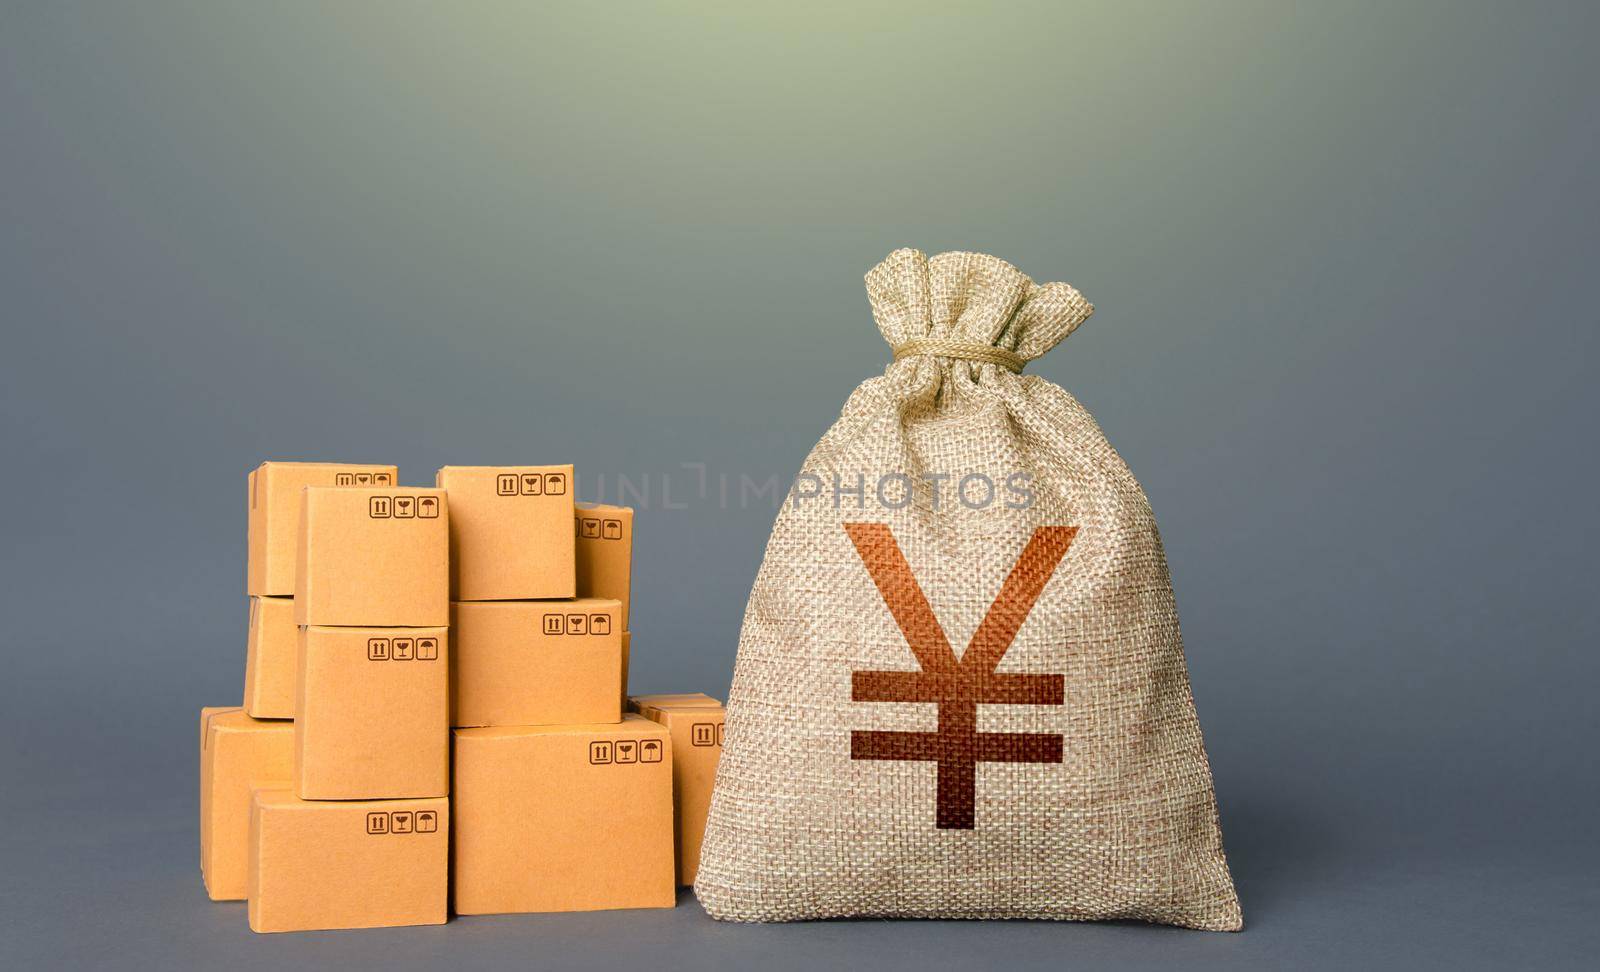 Boxes and chinese yen or japanese yuan money bag. The concept of trade in goods and production. Profit from trading. GDP economy. Import export. Warehousing logistics. Business industry. Delivering.